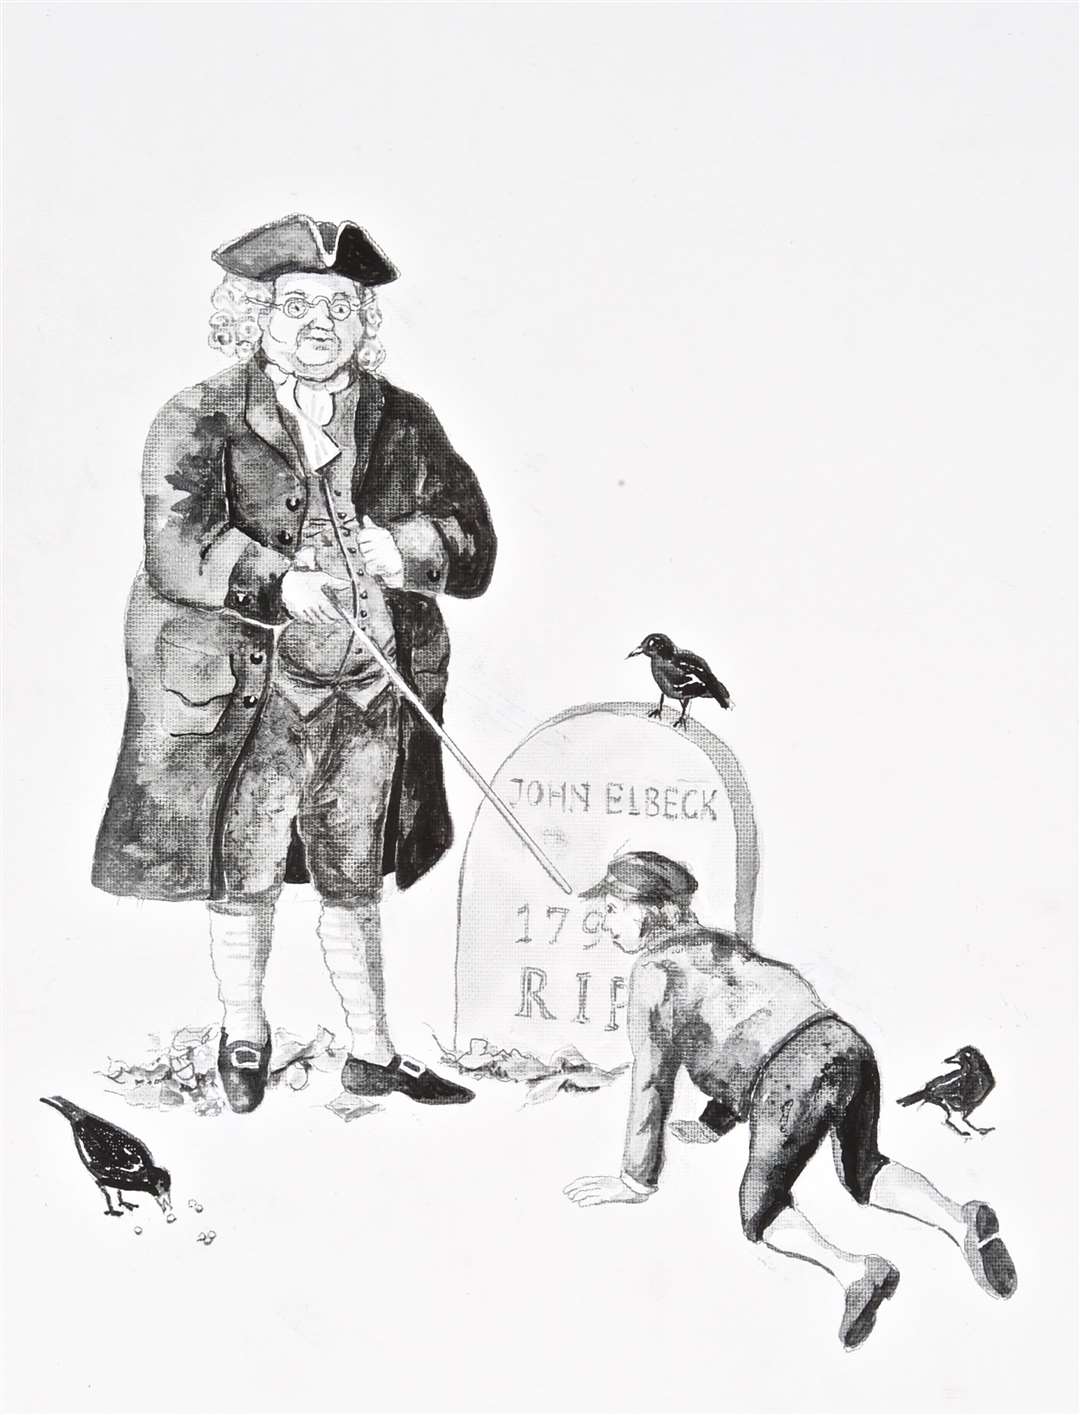 The Deal mayor invites Miles to read the tombstones in St George’s churchyard. Illustration by Susan Beresford